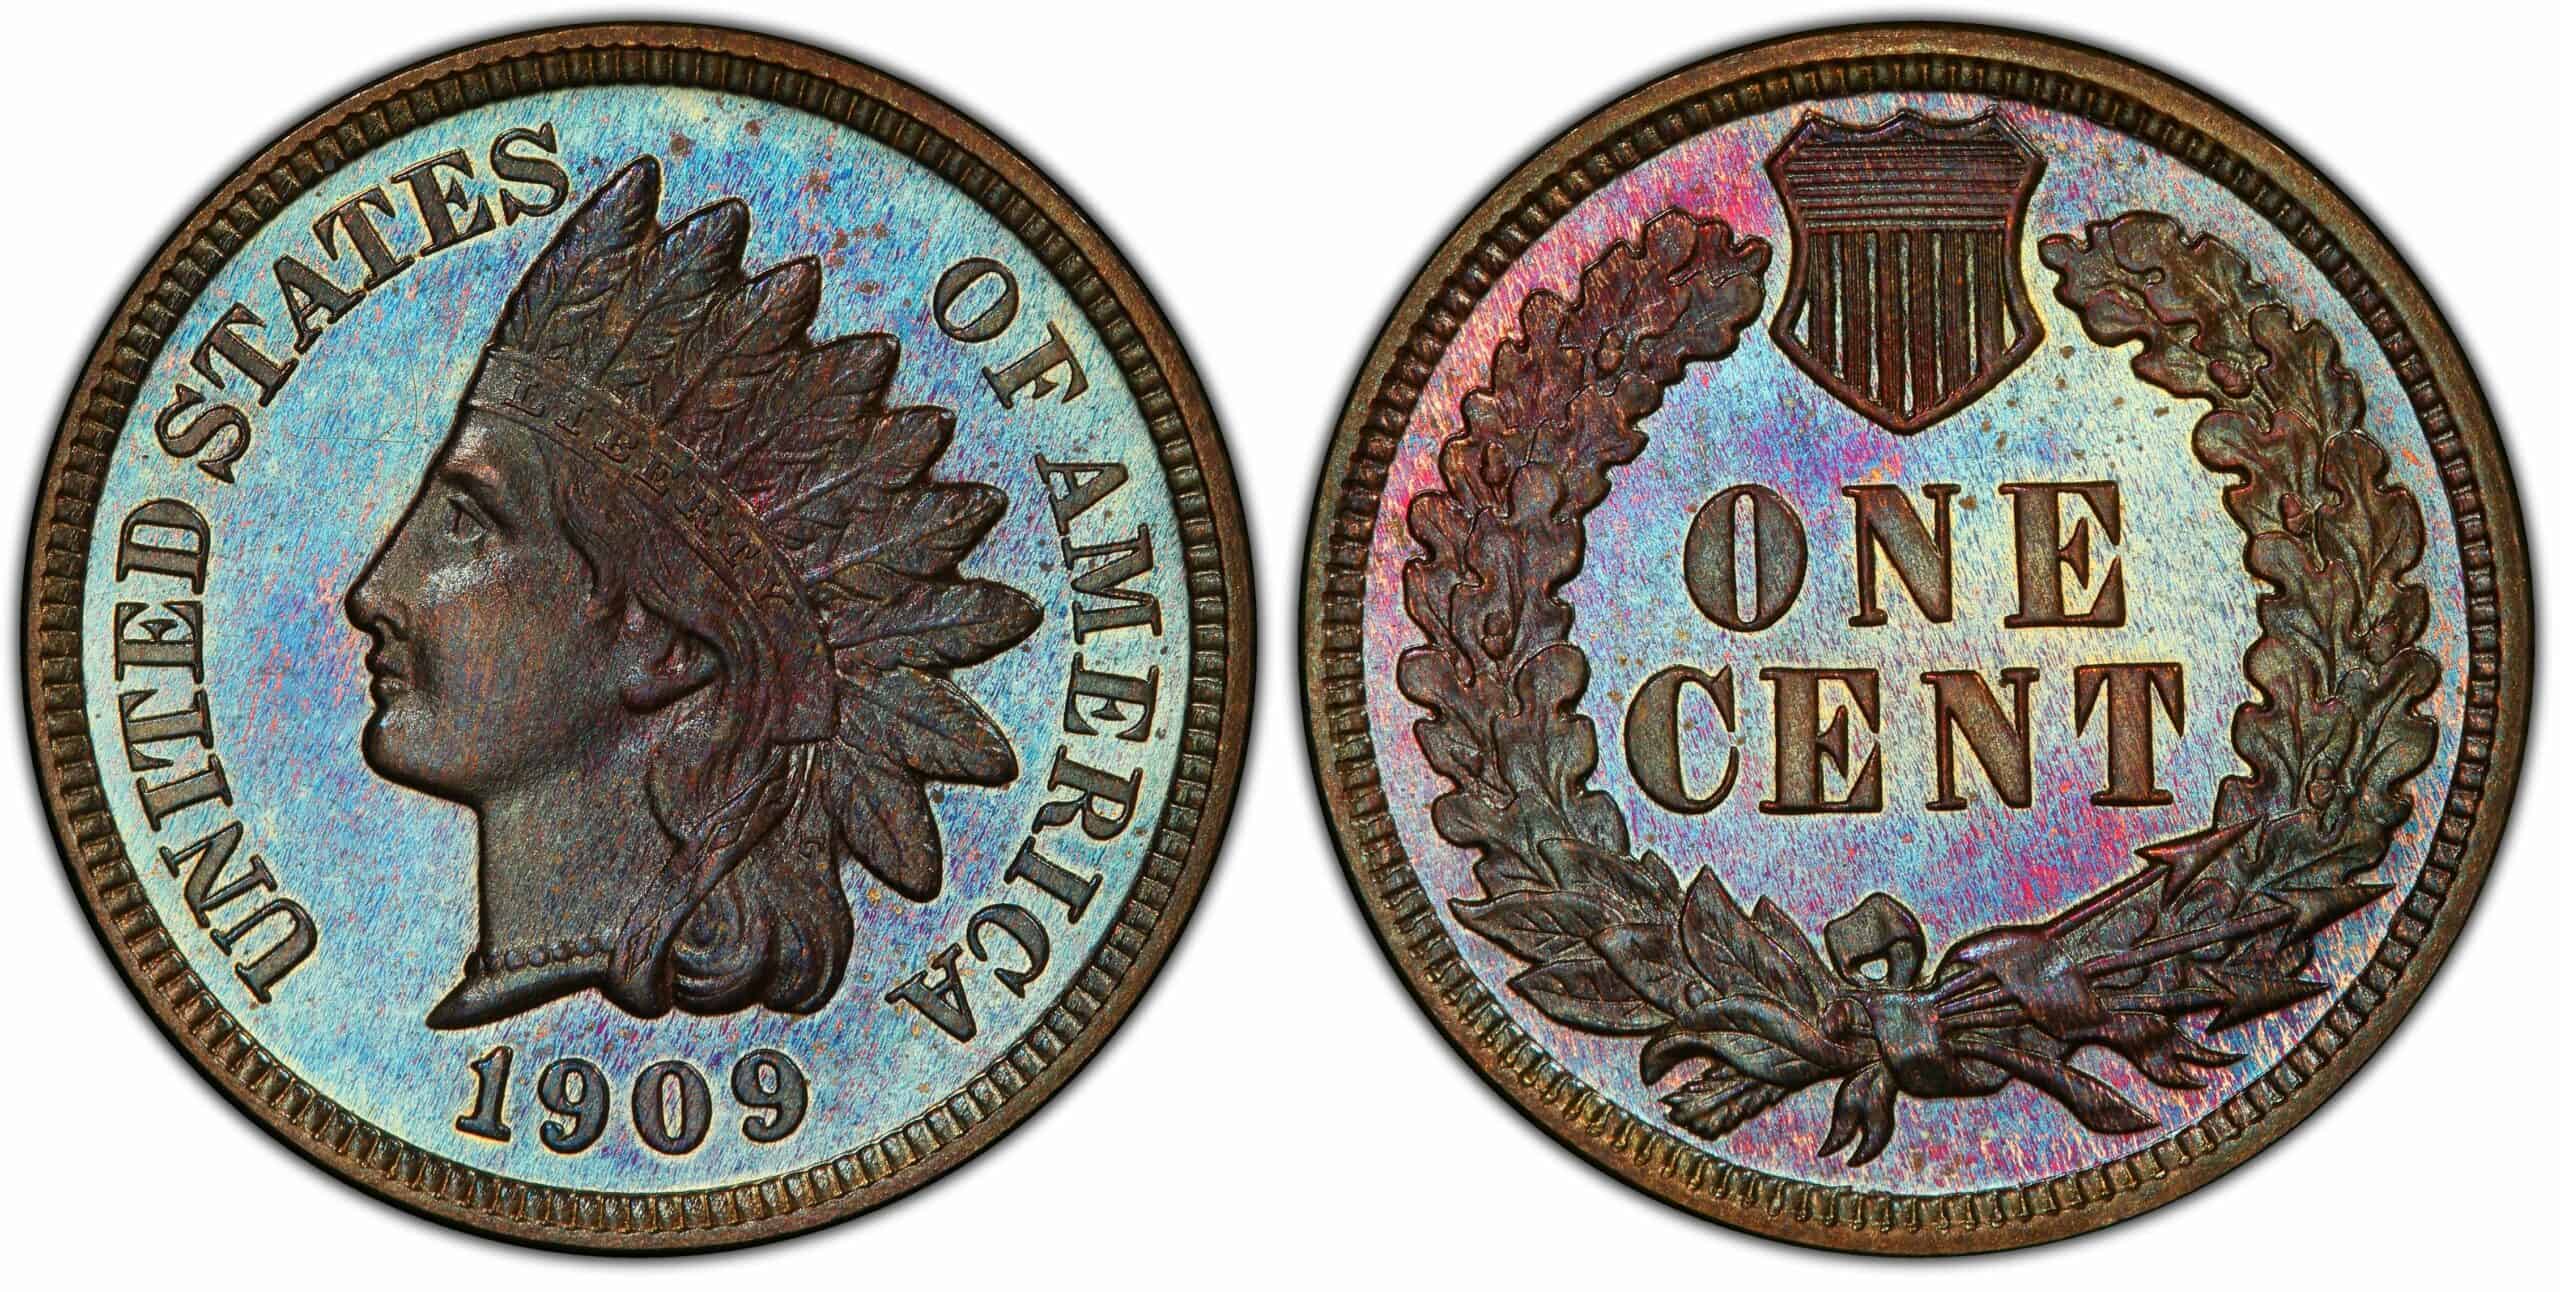 1909 Indian Head Penny Proof Coin